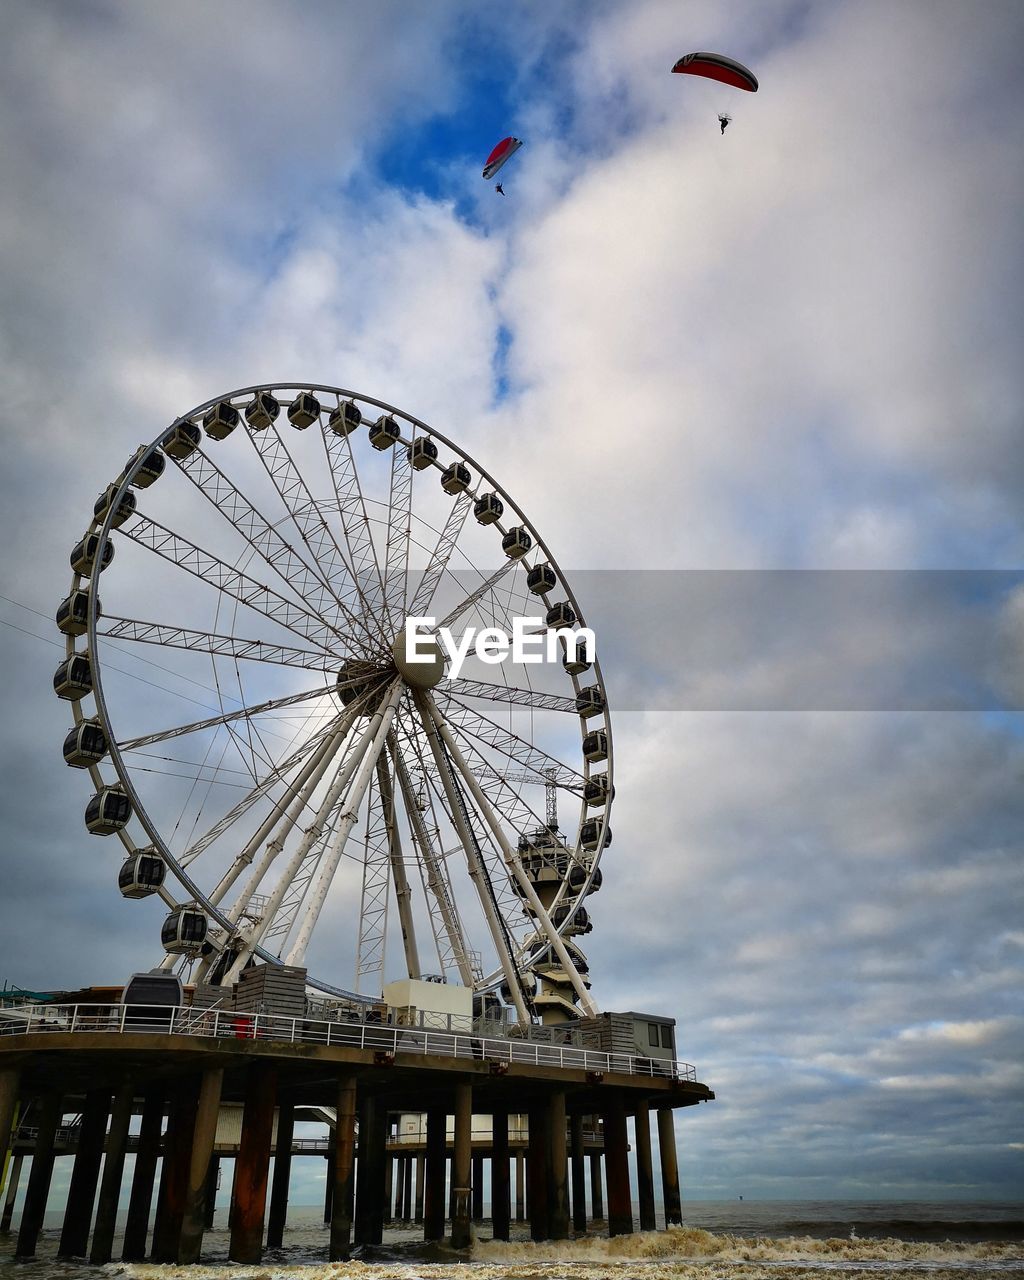 LOW ANGLE VIEW OF FERRIS WHEEL IN SEA